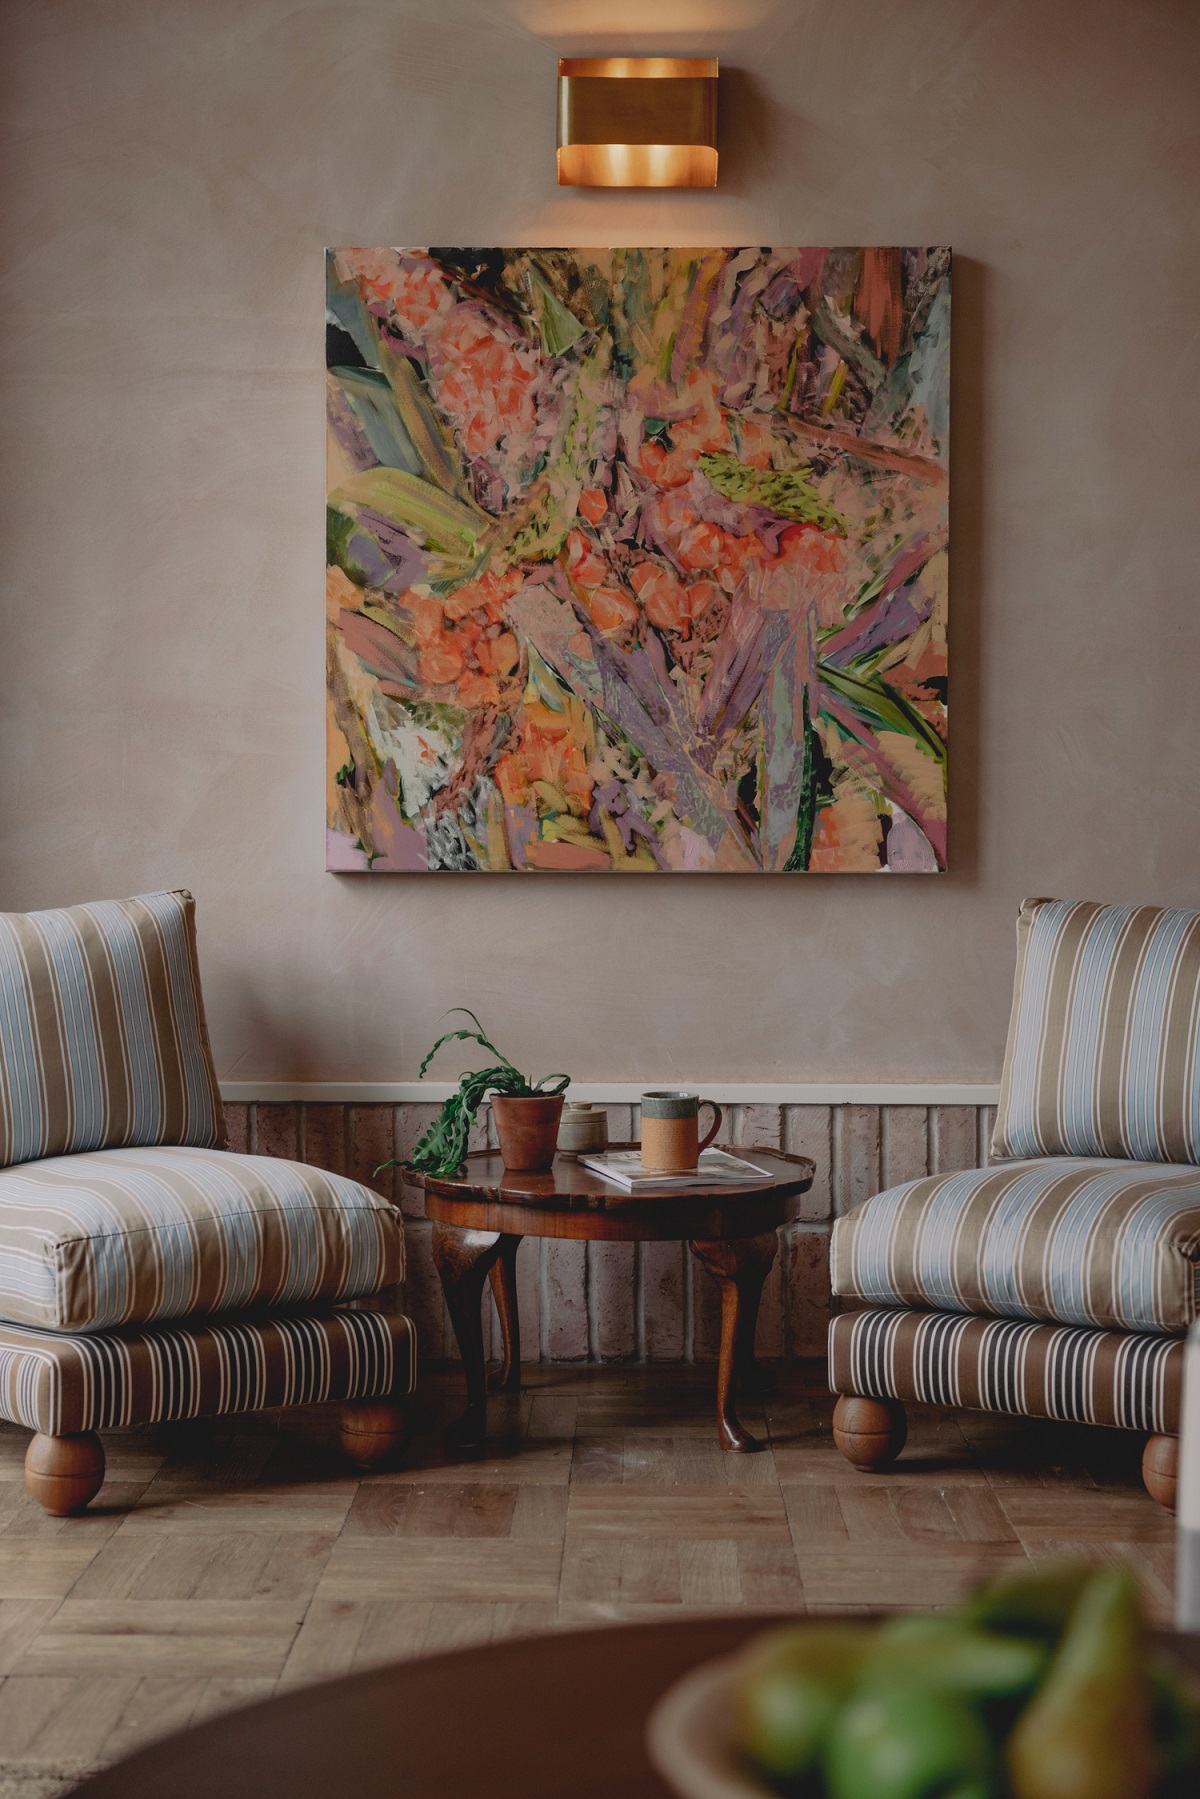 2 striped chairs below colourful contemporary painting